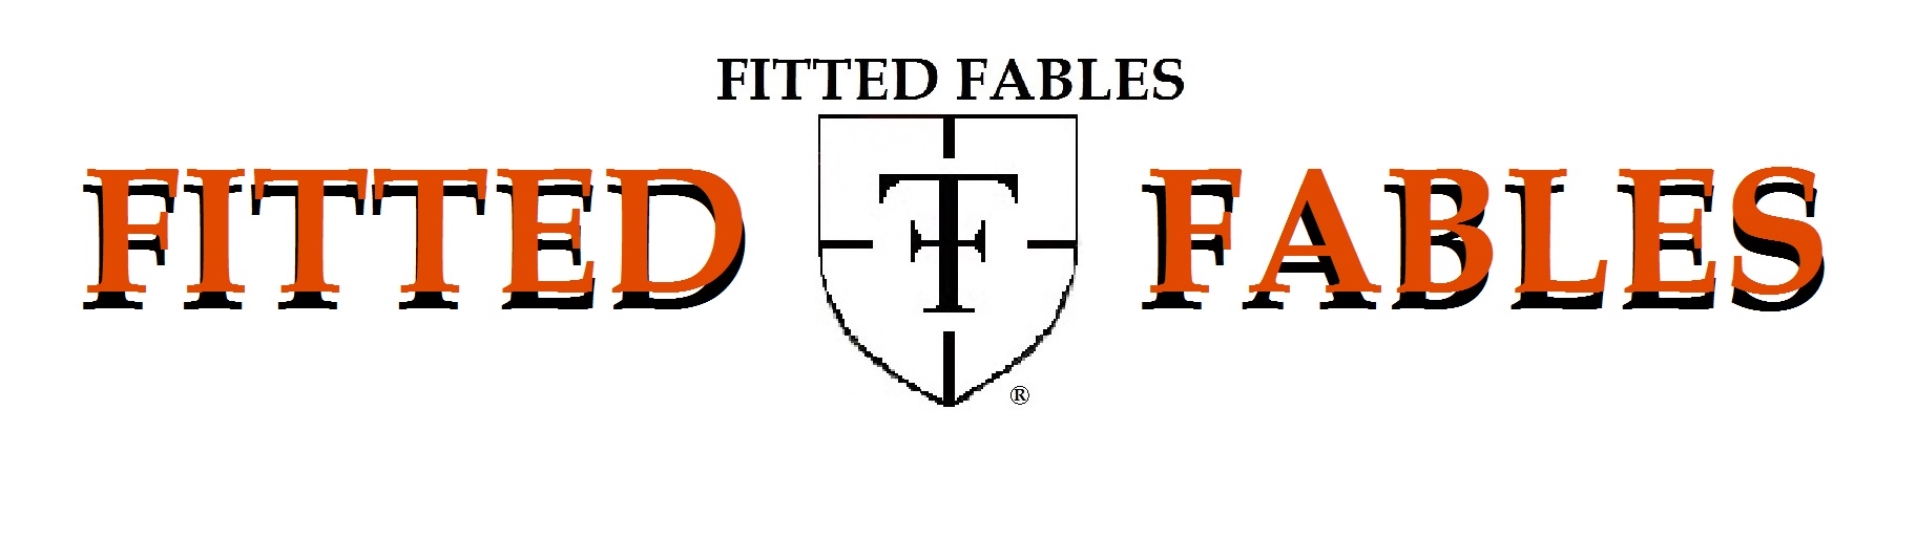 Verified - Fitted Fables dba (Steven Talbert Williams - founder)